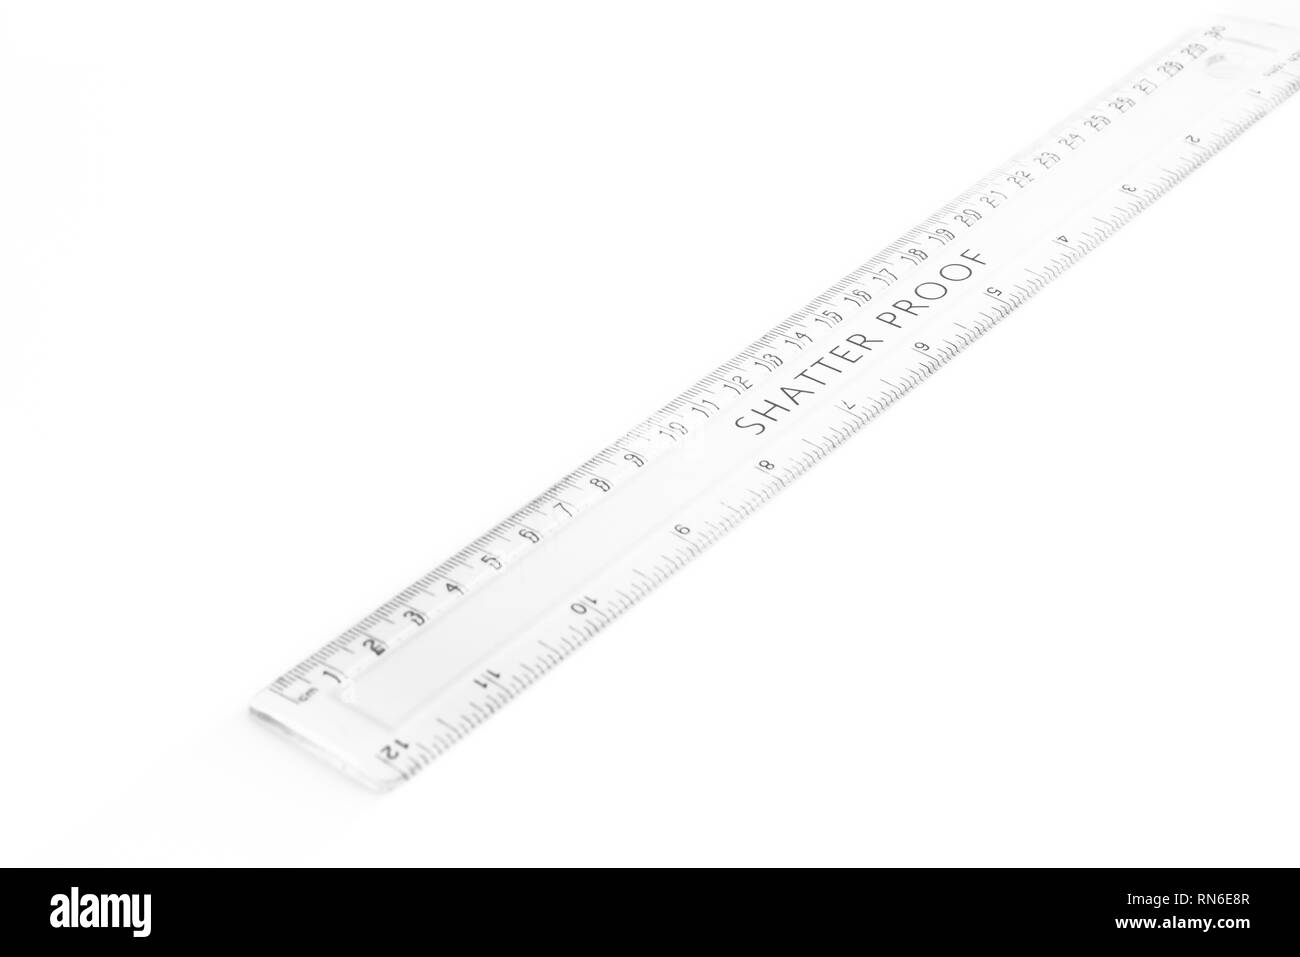 Concept measure tool, ruler measurement isolated on white background Stock Photo